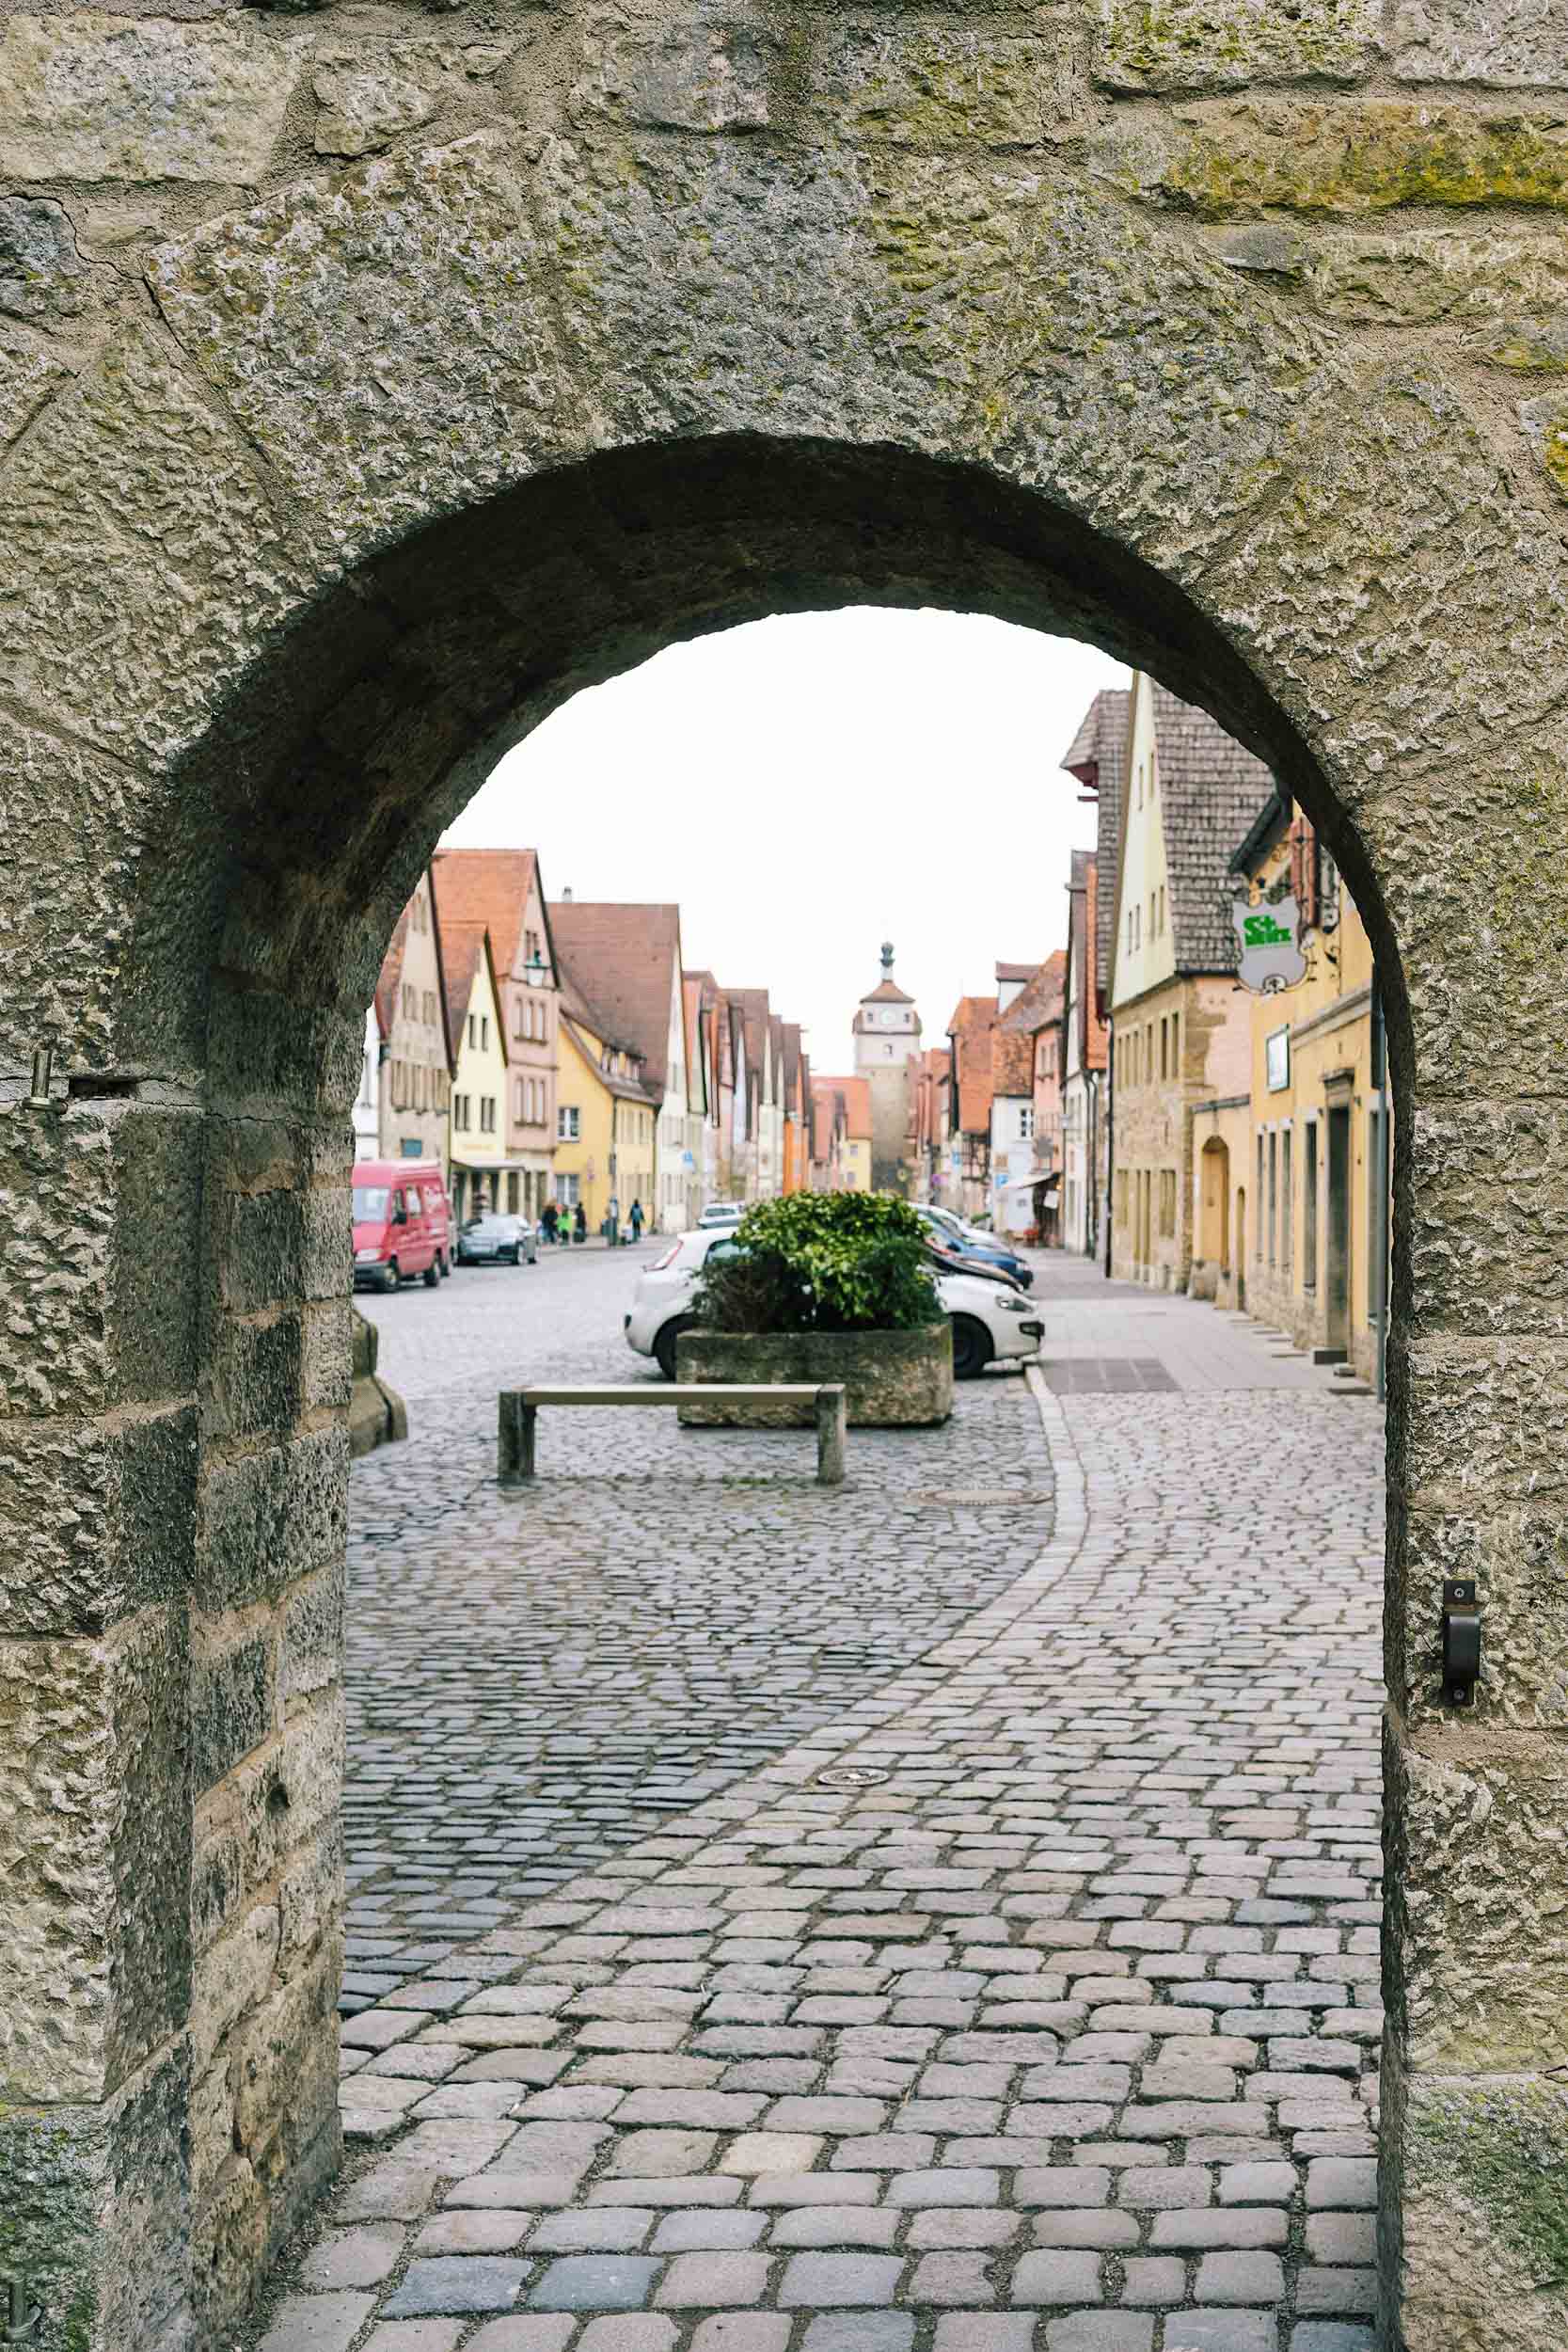 The entry to the medieval part of Rothenburg